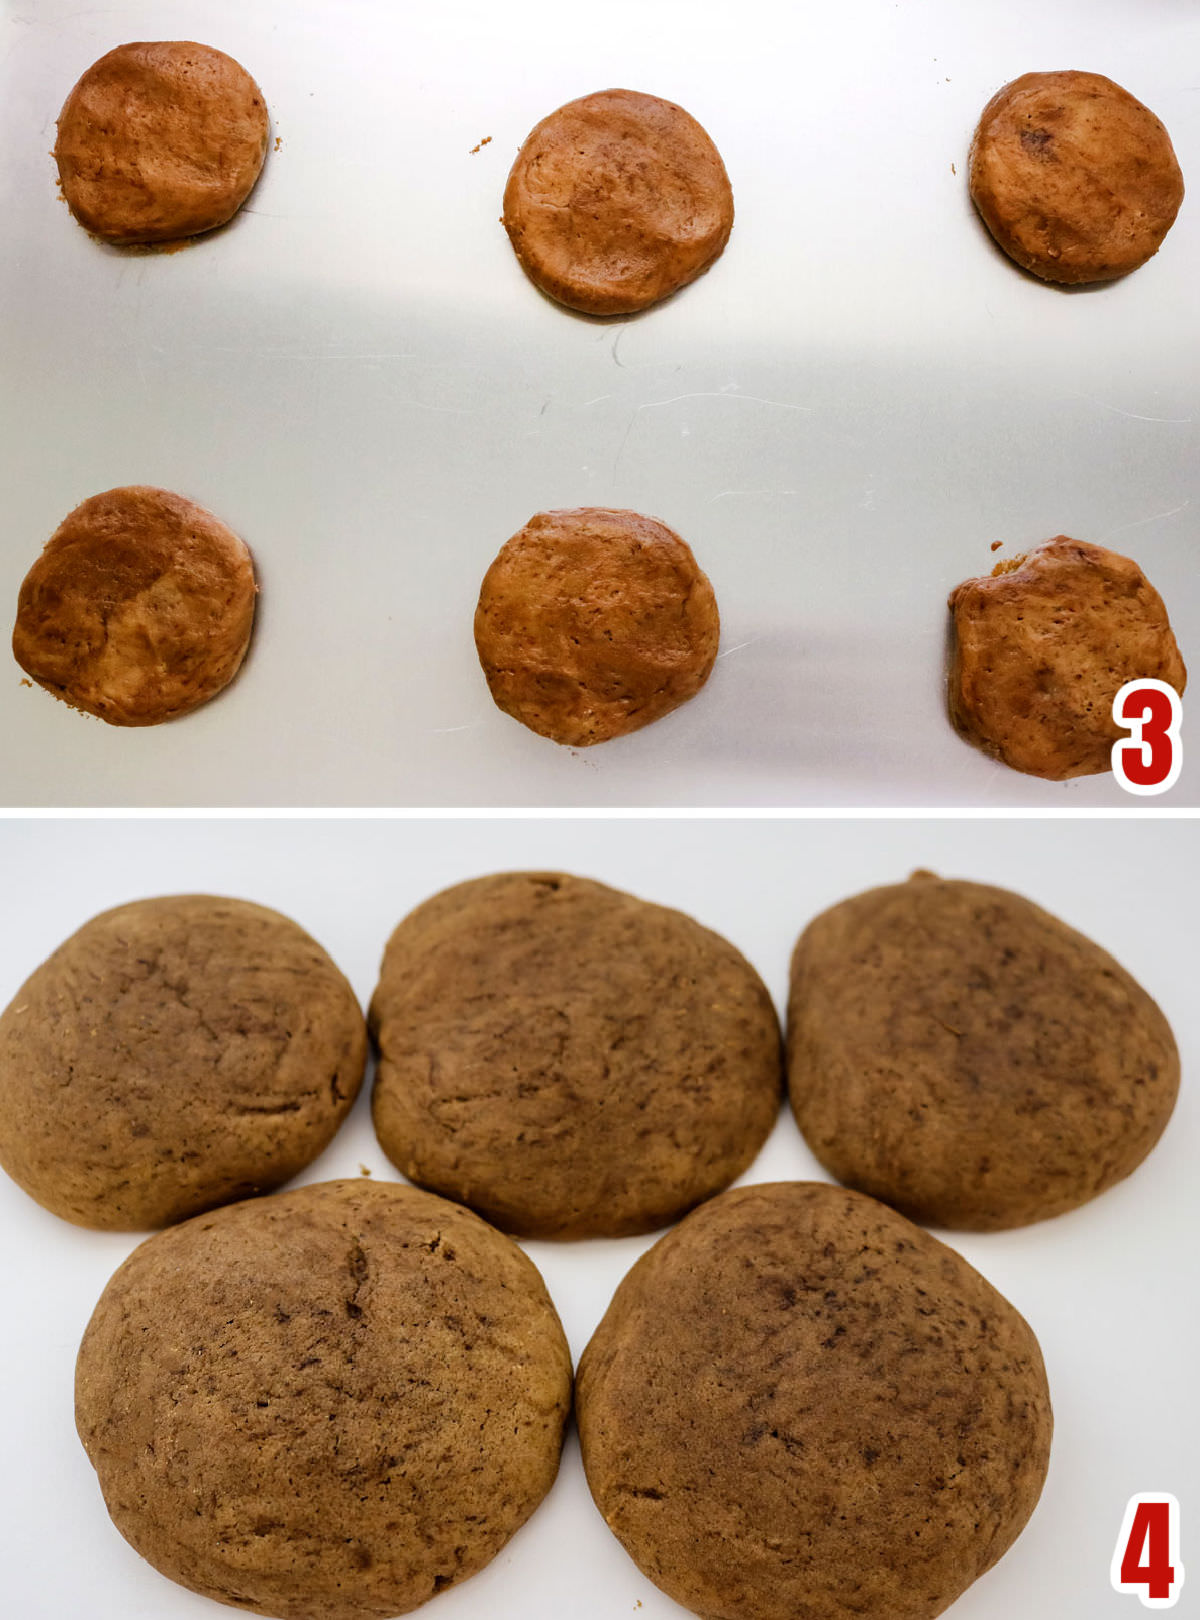 Collage image showing the coffee cookies before going in the oven and after coming out of the oven.